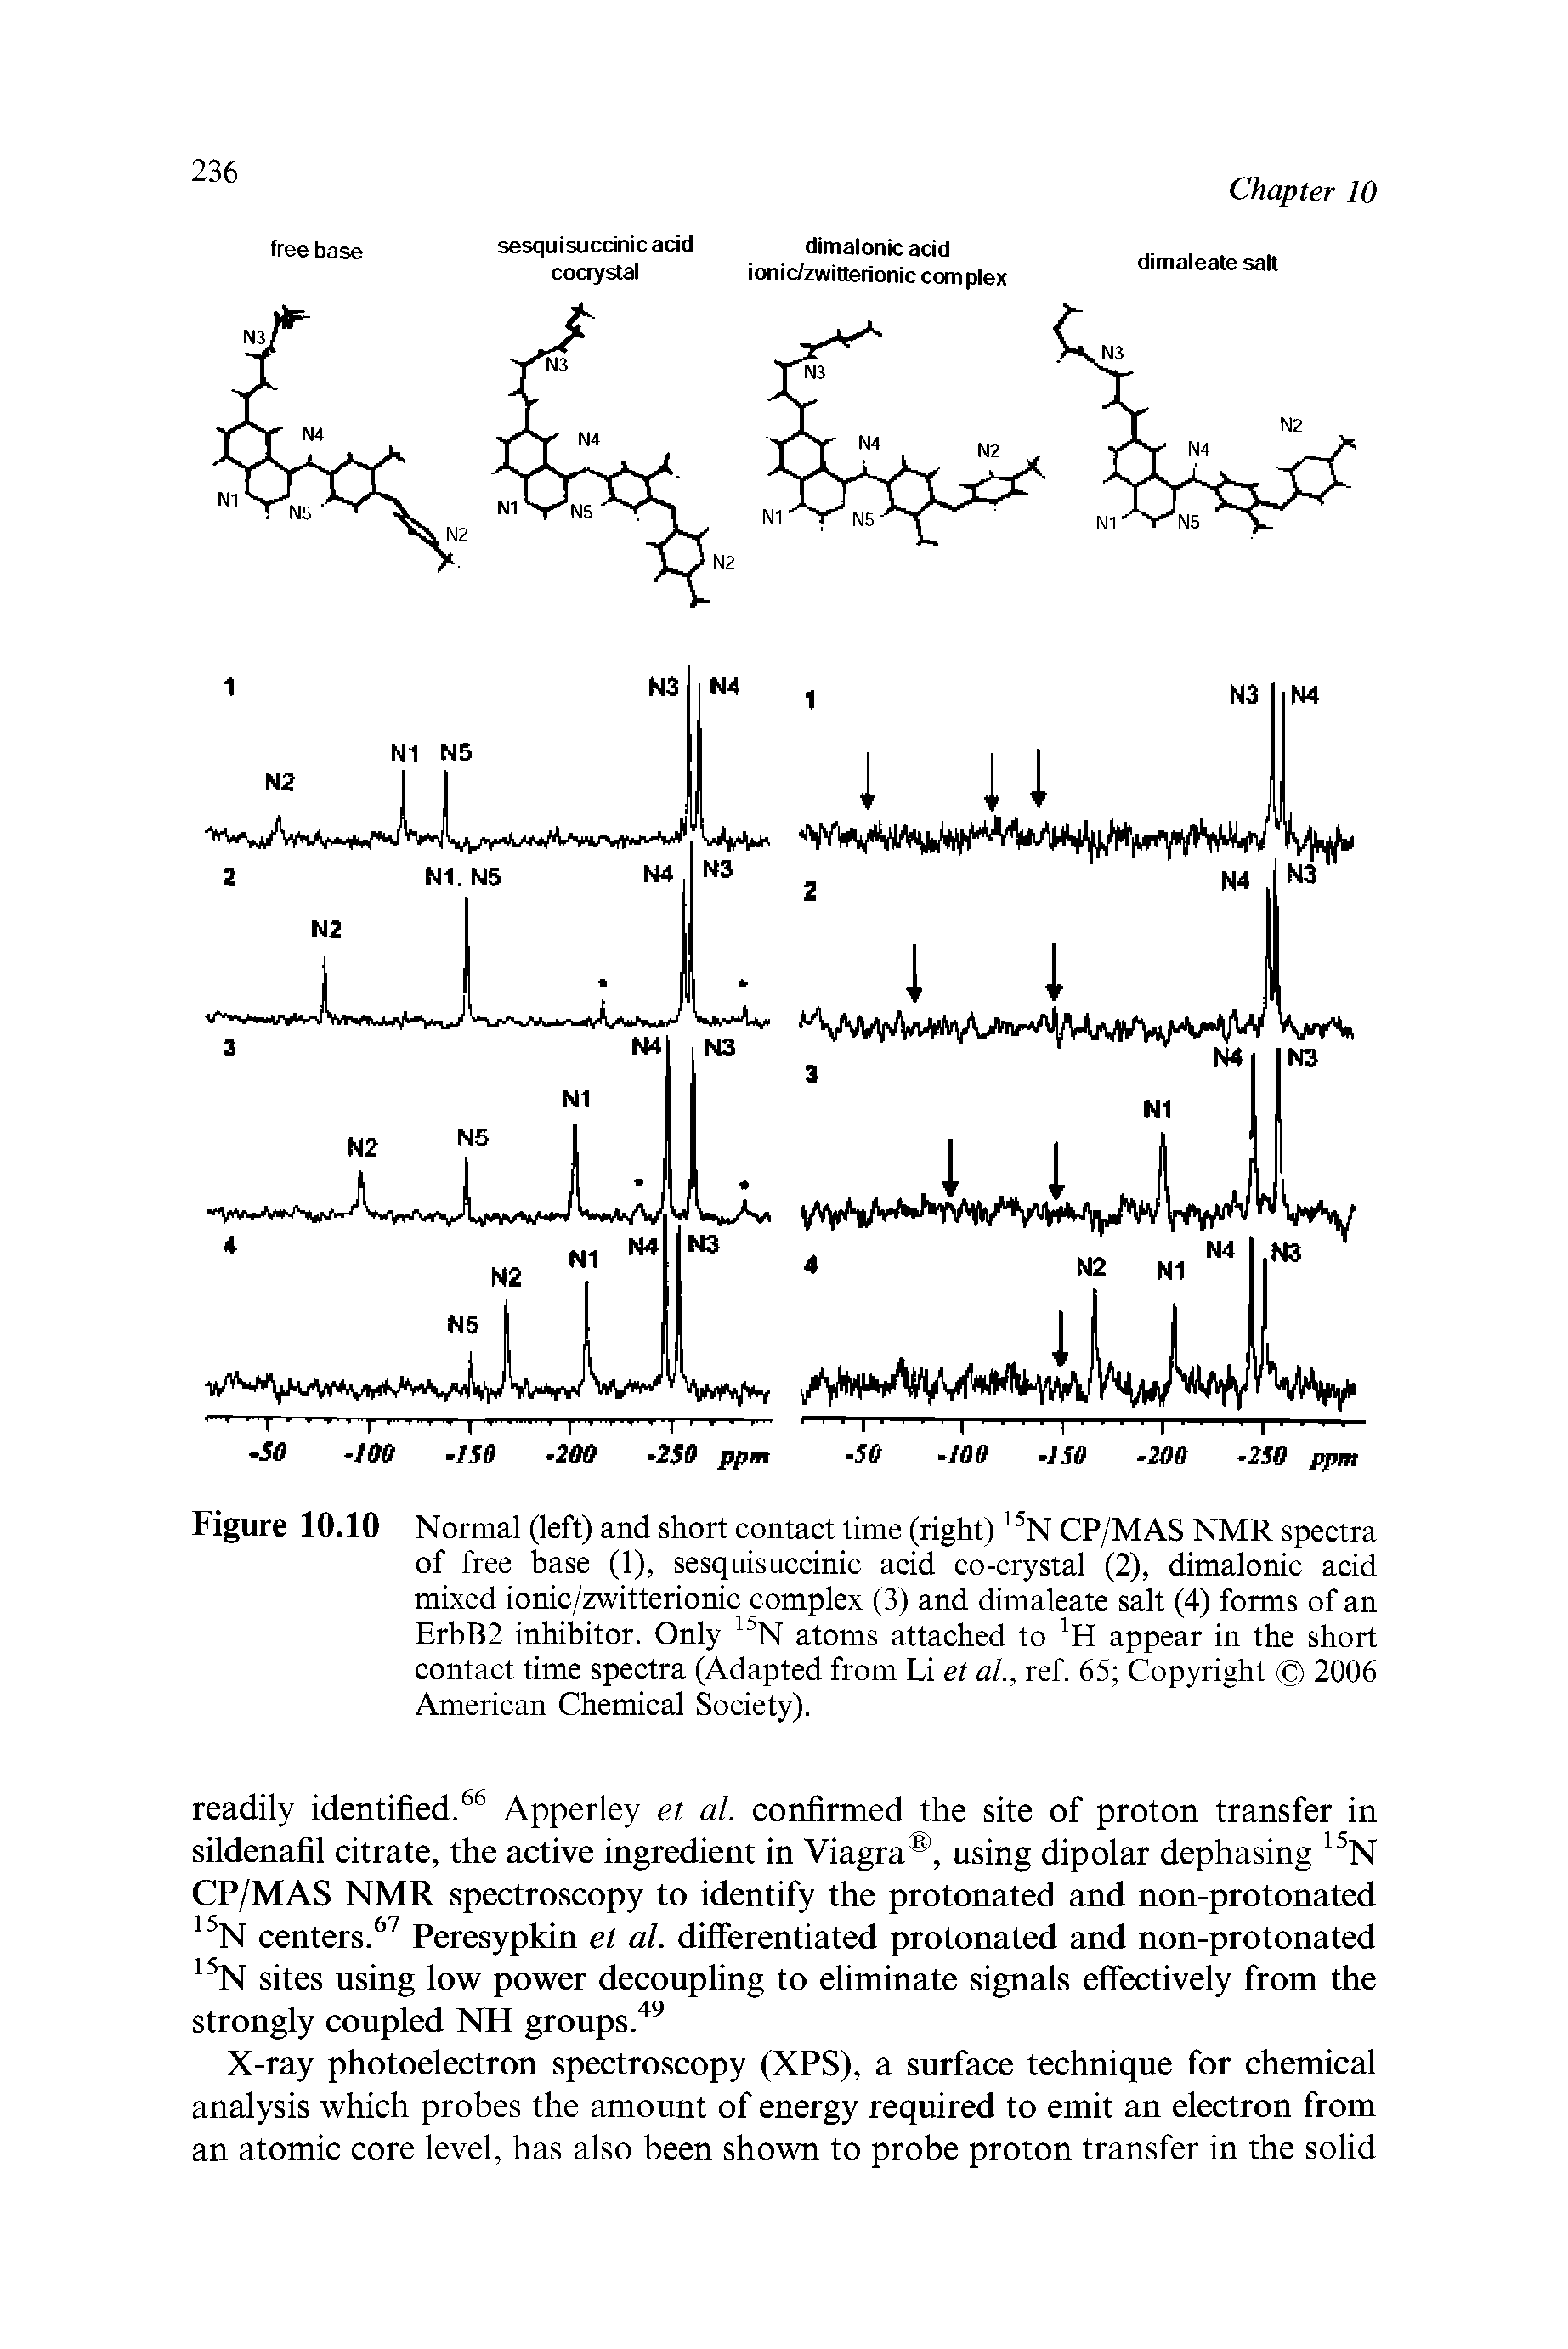 Figure 10.10 Normal (left) and short contact time (right) N CP/MAS NMR spectra of free base (1), sesquisuccinic acid co-crystal (2), dimalonic acid mixed ionic/zwitterionic complex (3) and dimaleate salt (4) forms of an ErbB2 inhibitor. Only N atoms attached to appear in the short contact time spectra (Adapted from Li et al, ref. 65 Copyright 2006 American Chemical Society).